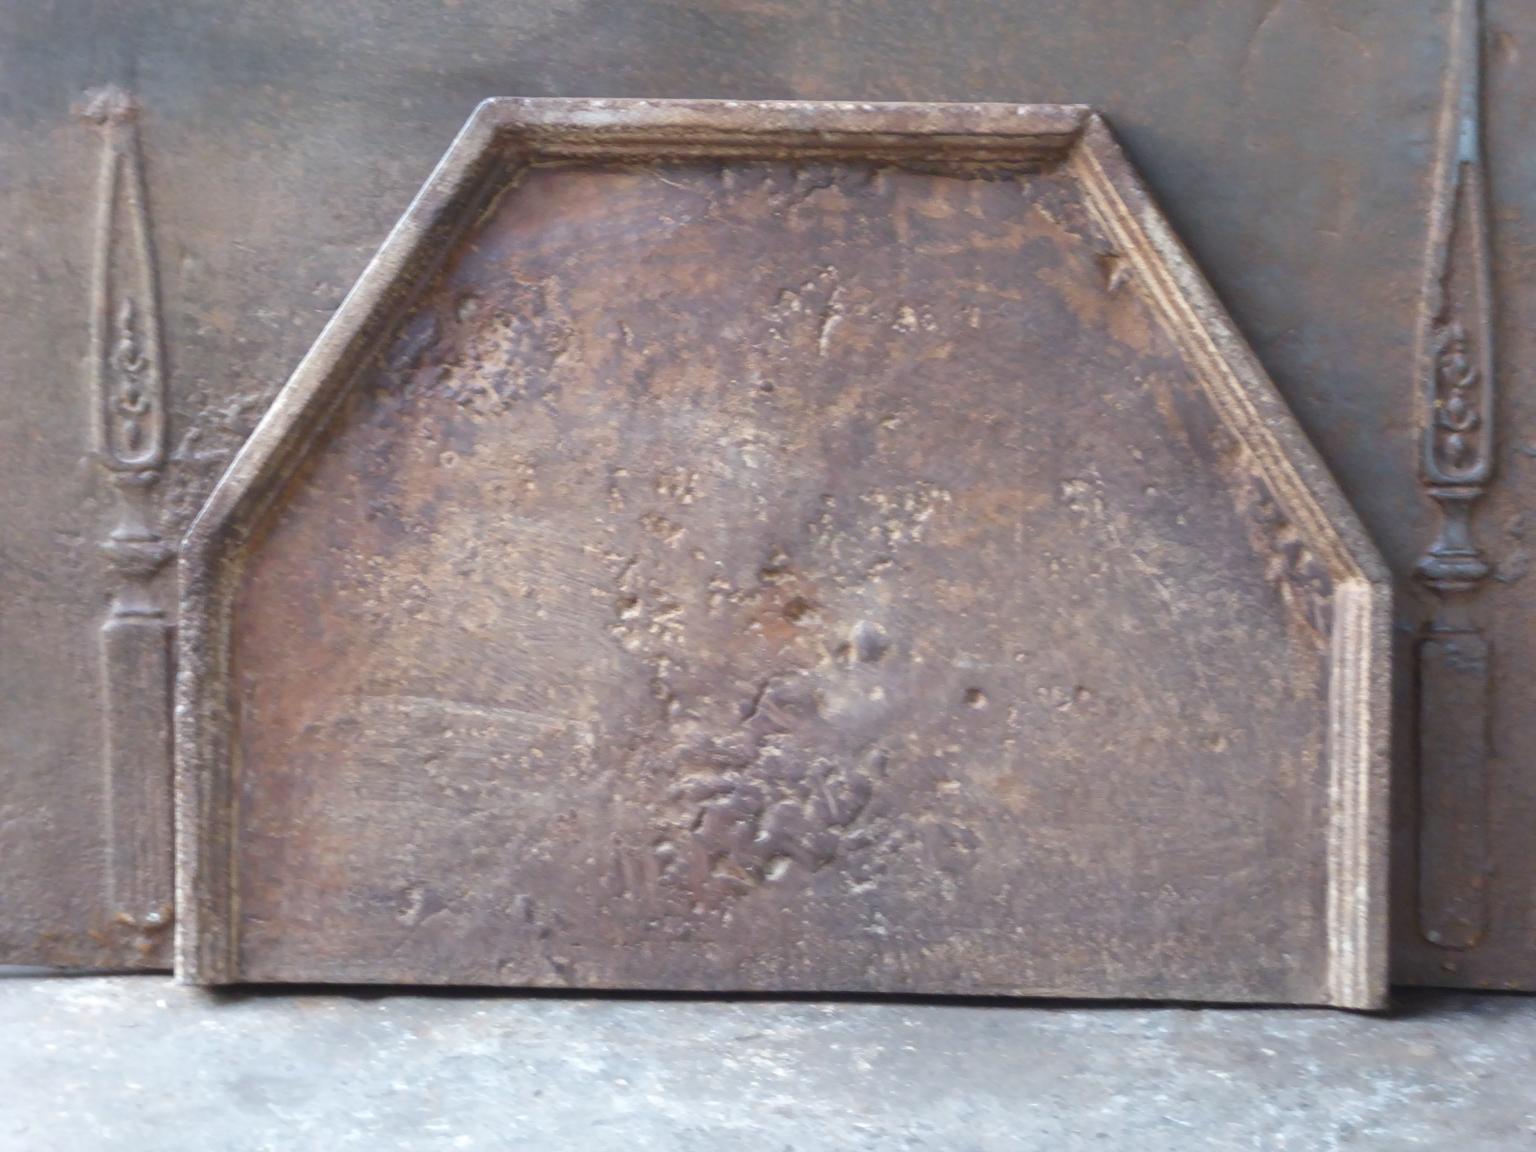 Beautiful 17th-18th century French fireback. The style of the fireback is Louis XIV and it is from that period.

The patina of the fireback is a natural brown, which can be made black or pewter upon request. The condition is good, no cracks.